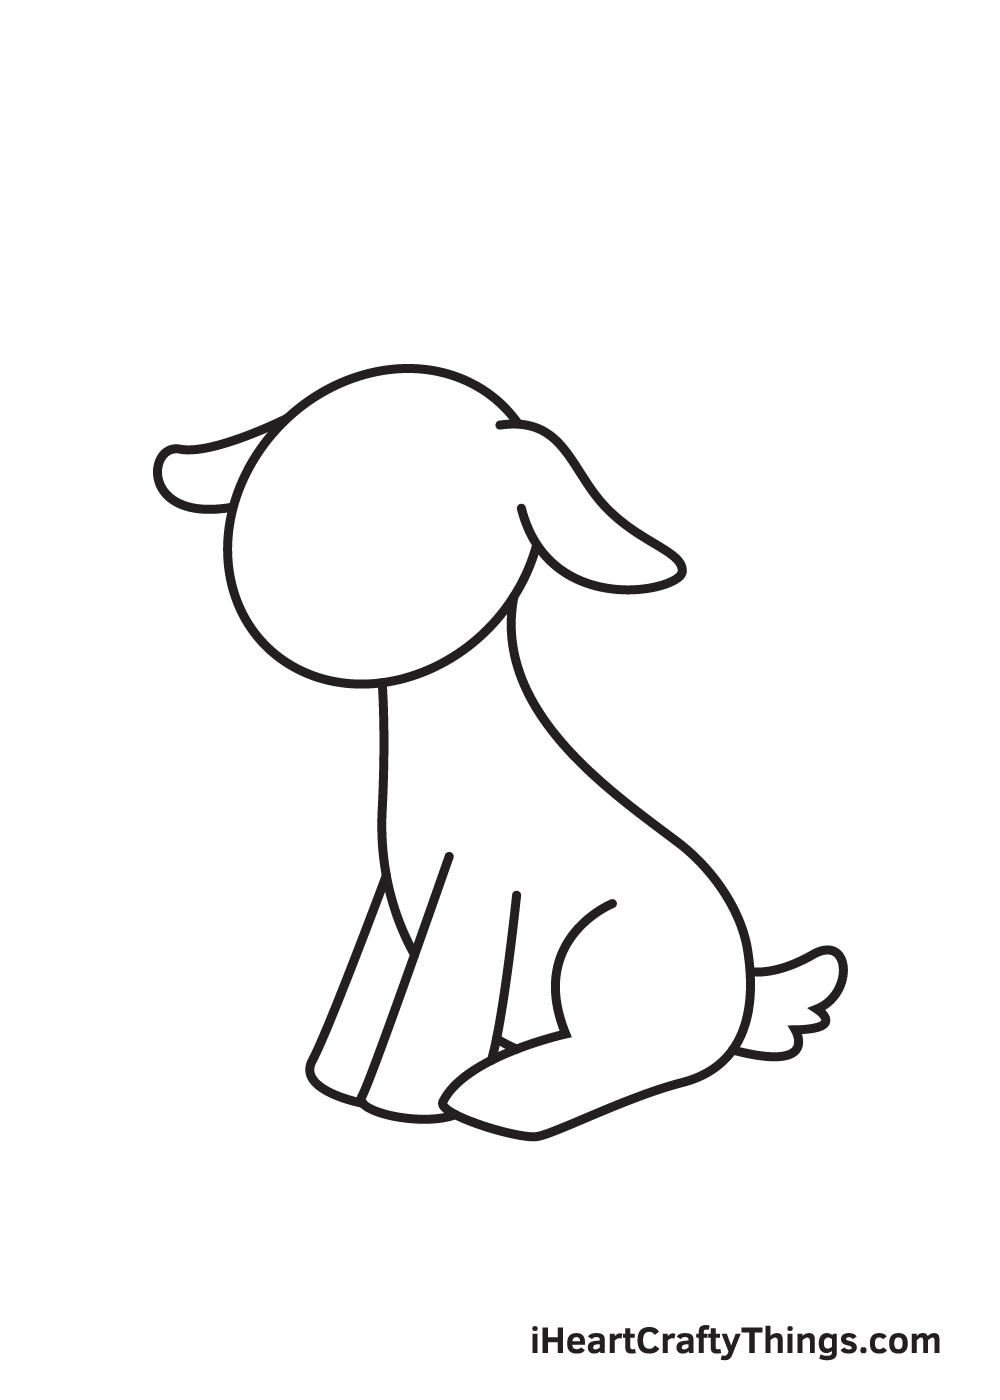 goat drawing - step 6